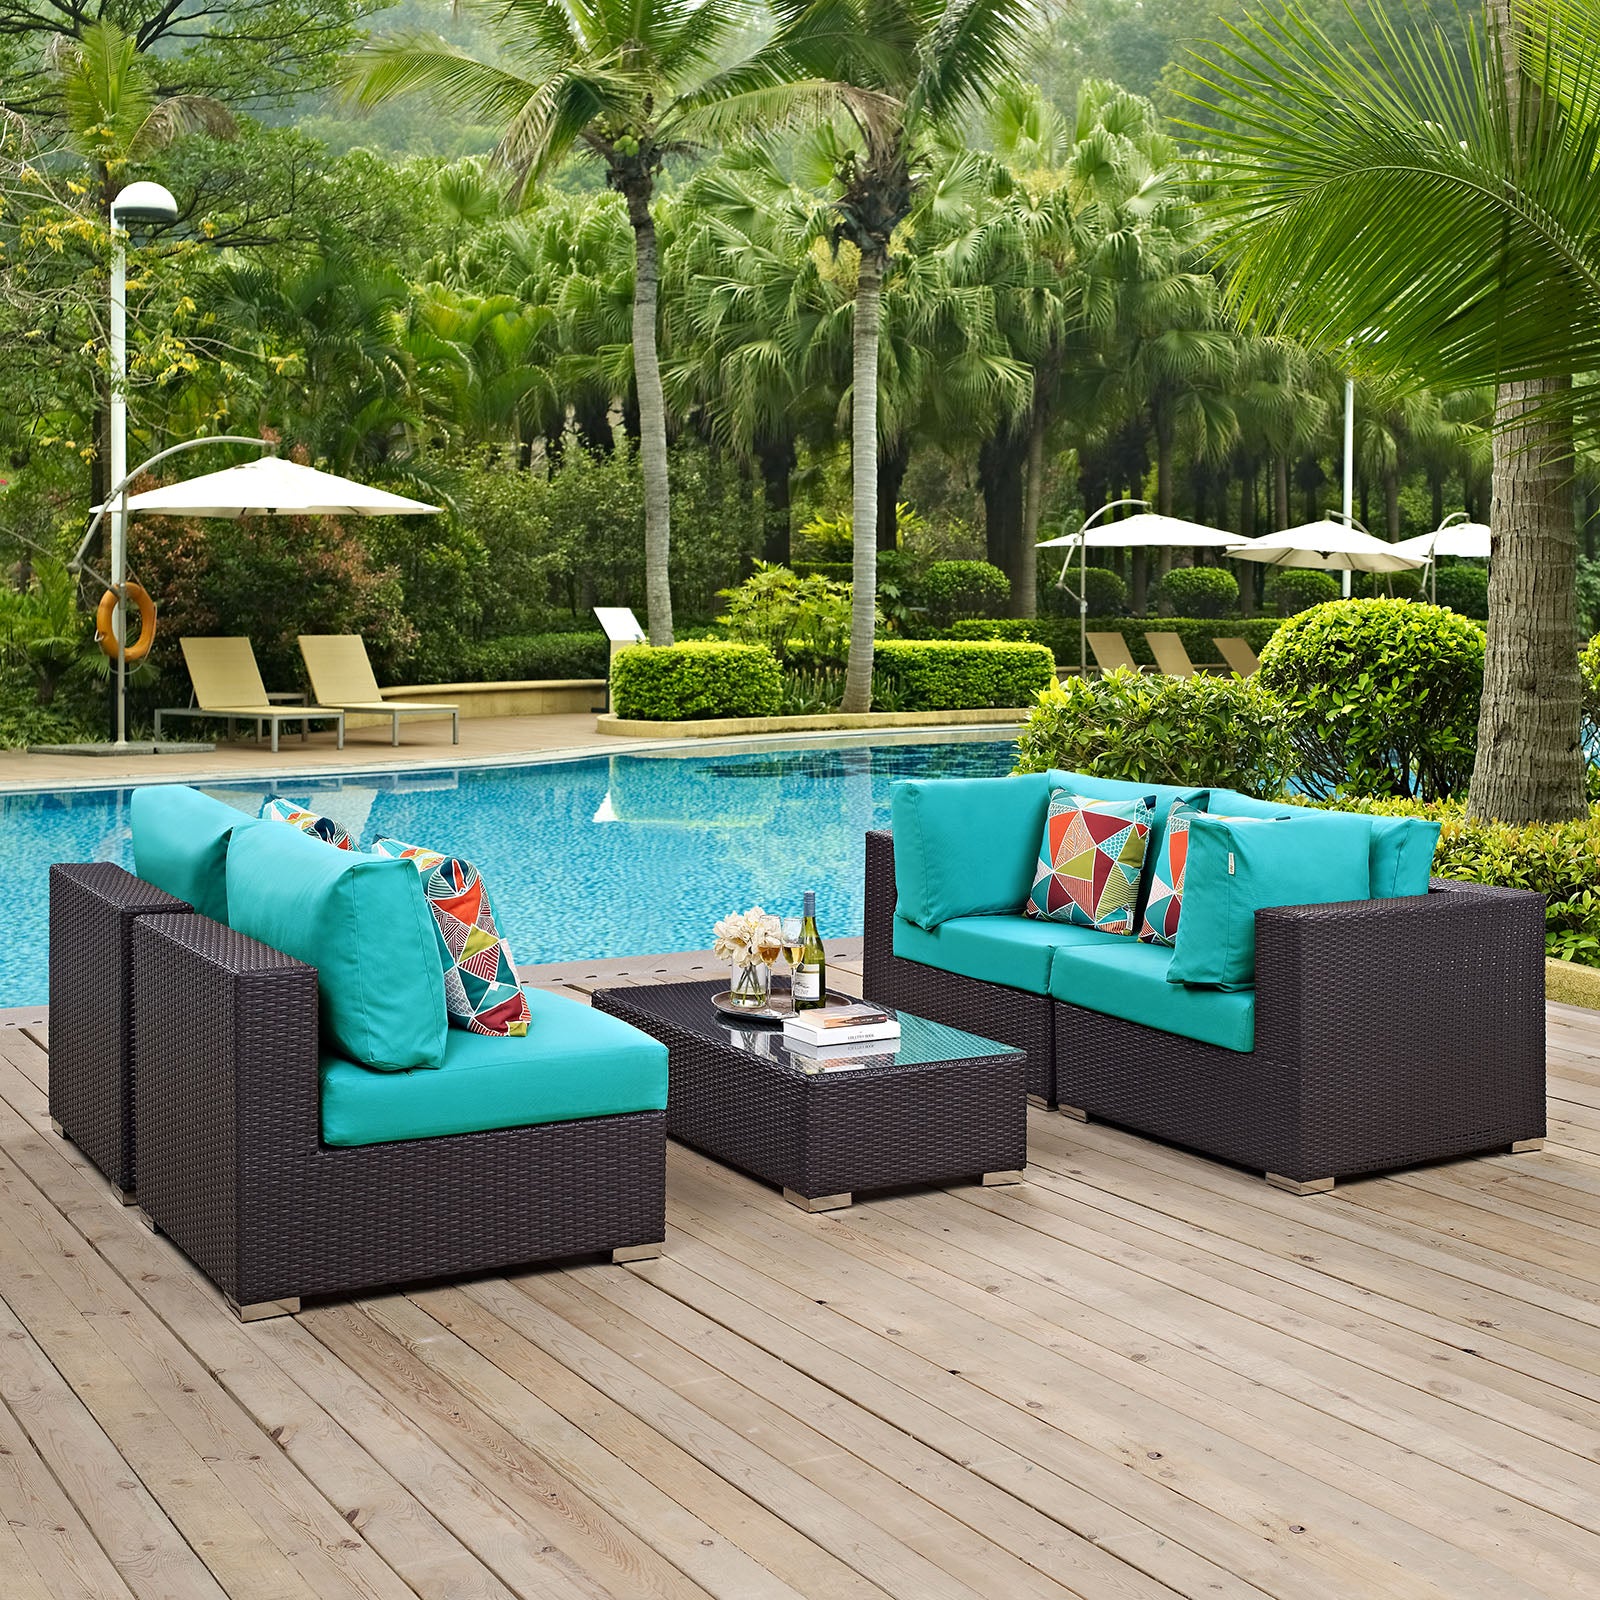 Modway Outdoor Conversation Sets - Convene 5-Piece Outdoor Patio Sectional Set Turquoise Expresso